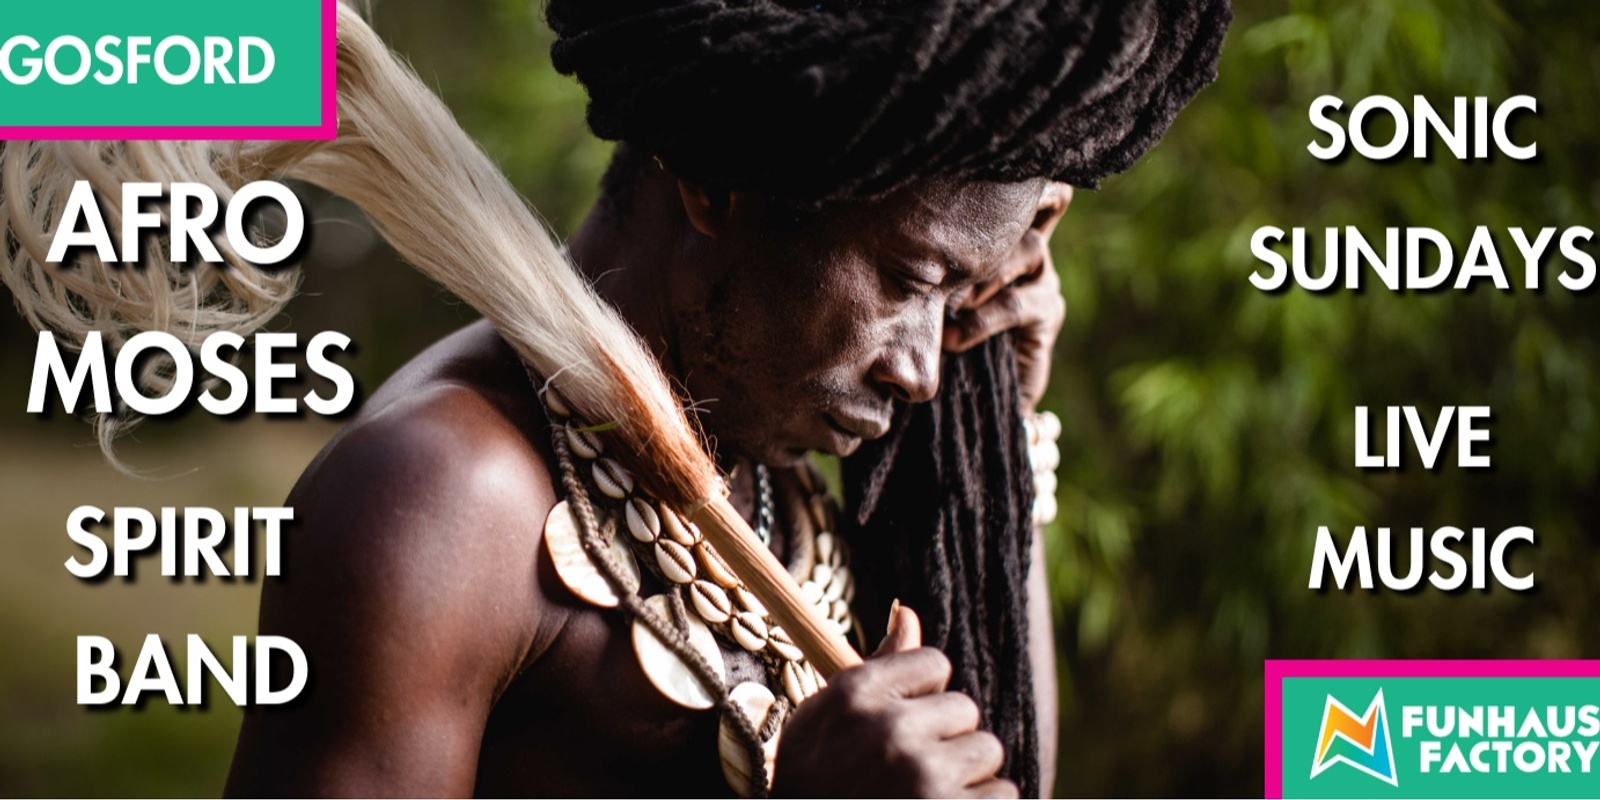 Banner image for LIVE MUSIC: Afro Moses Spirit Band